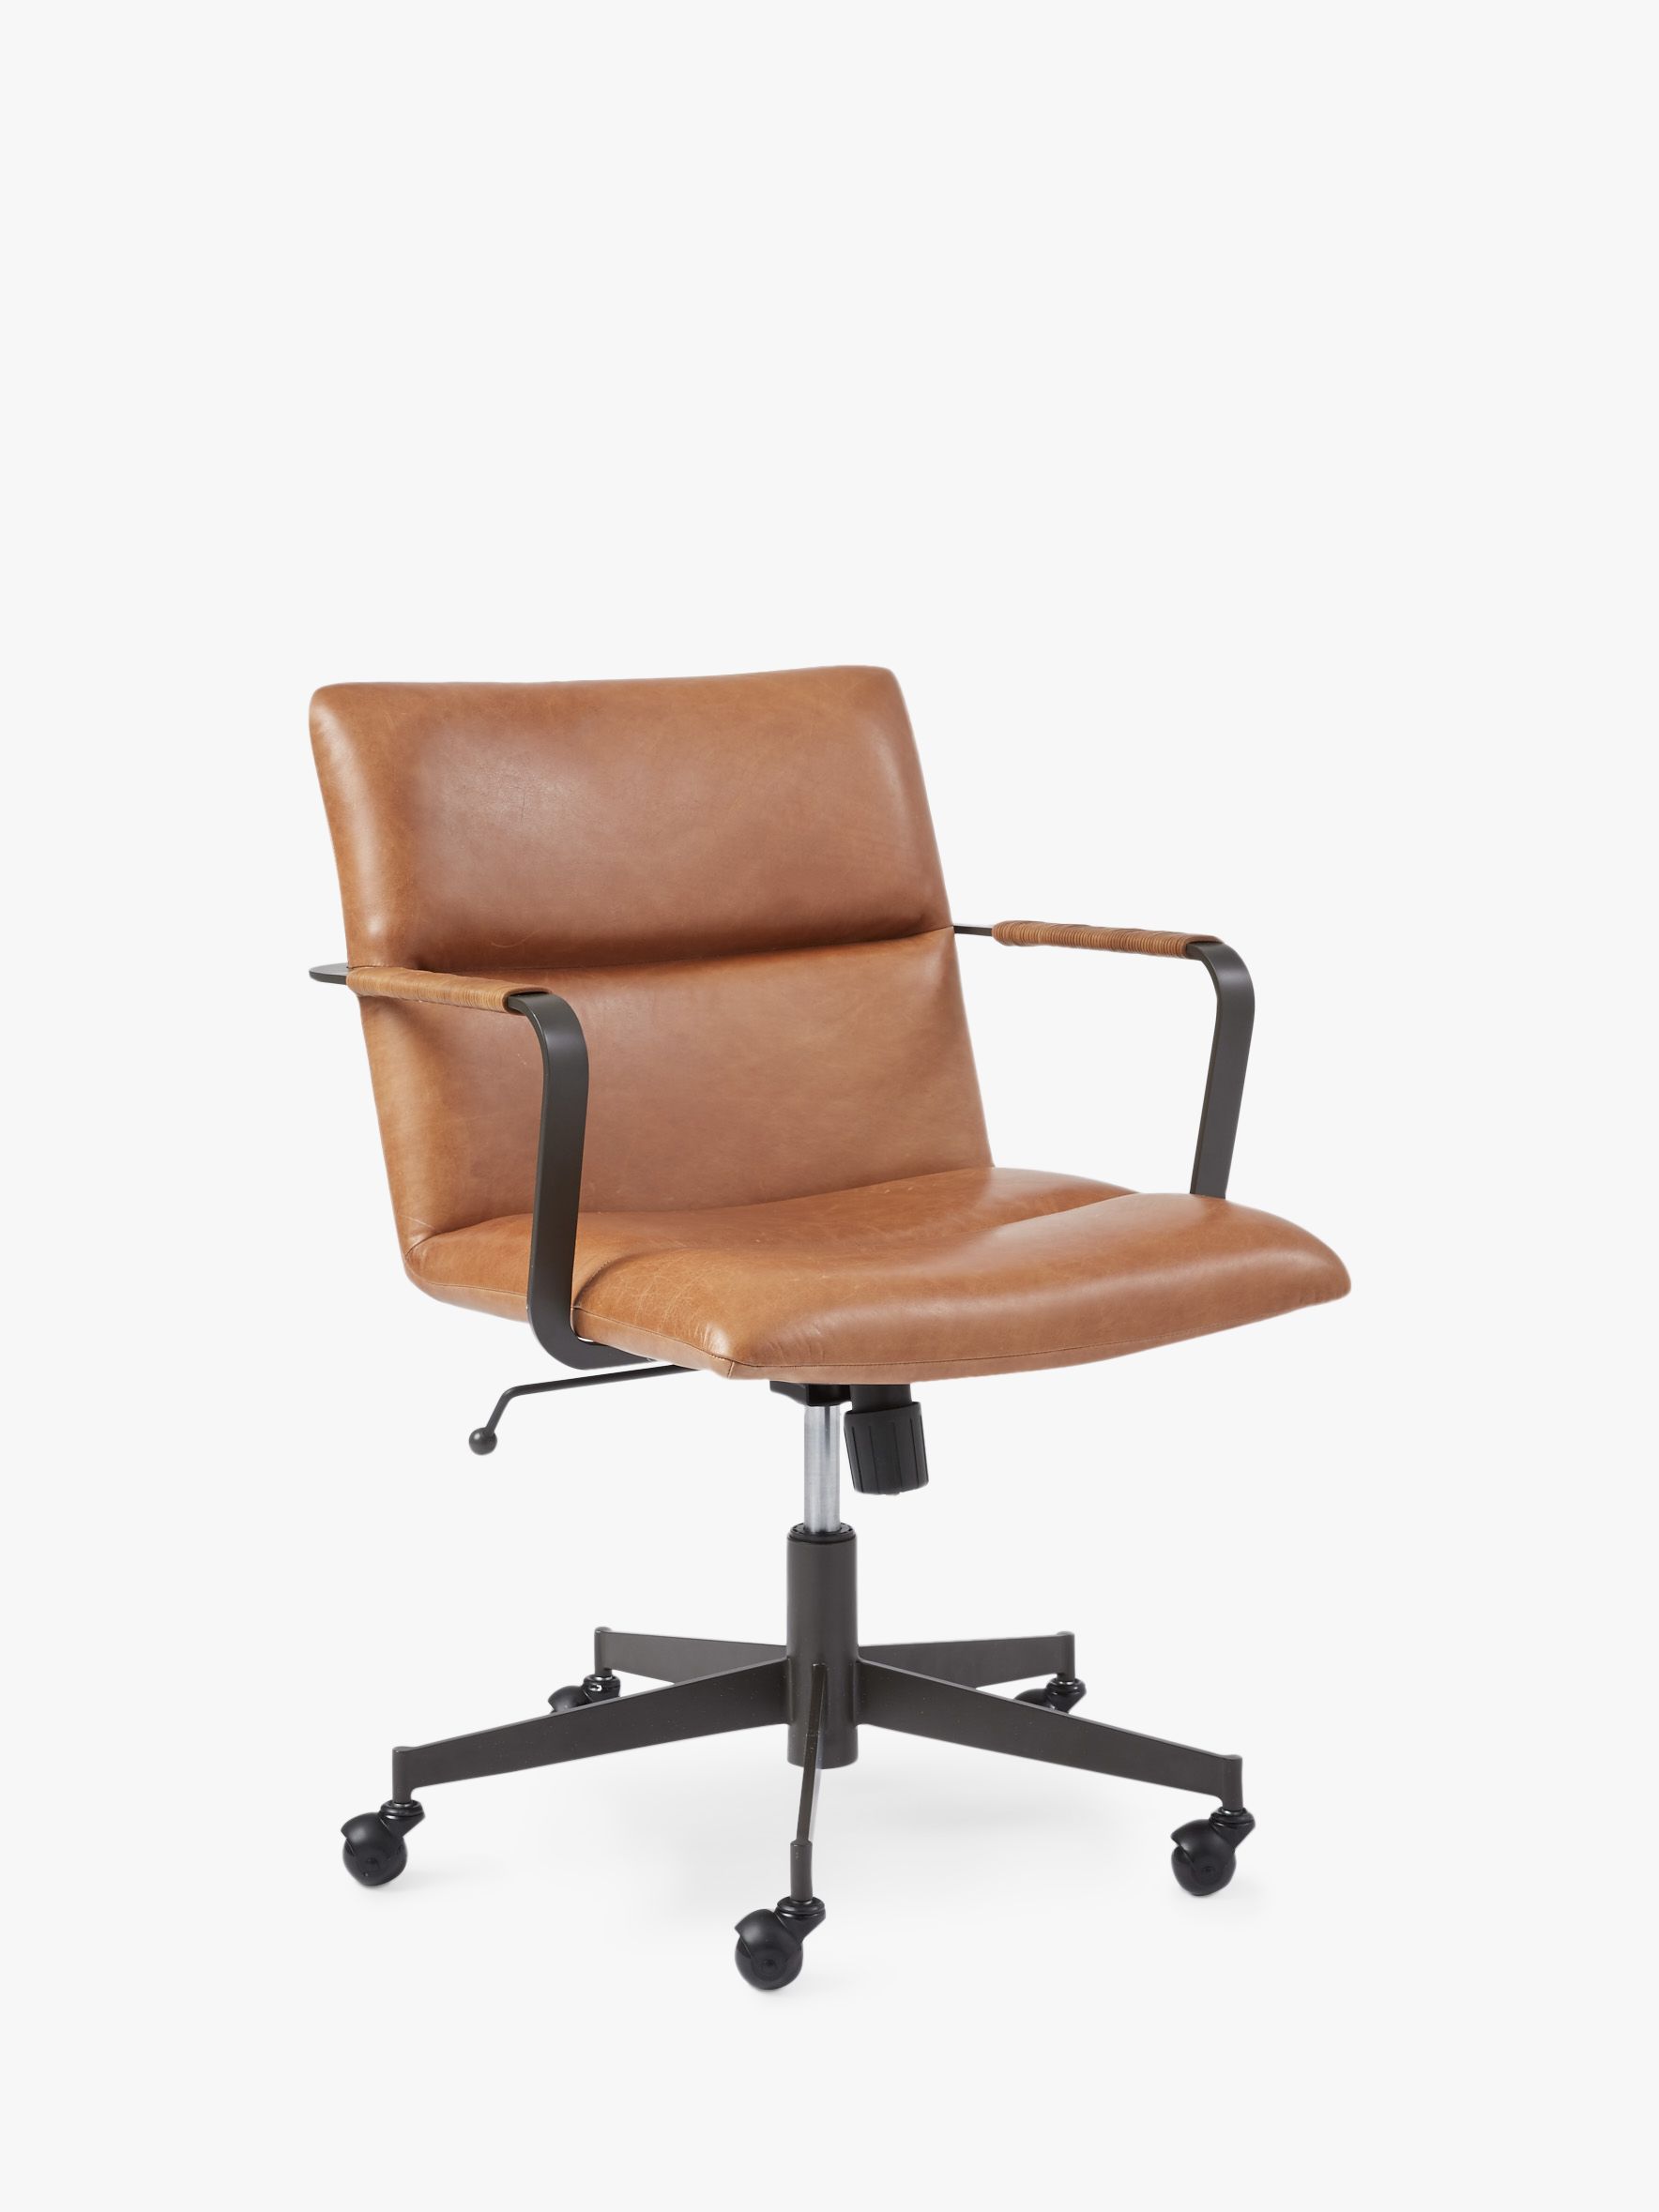 west elm cooper midcentury leather office chair tan